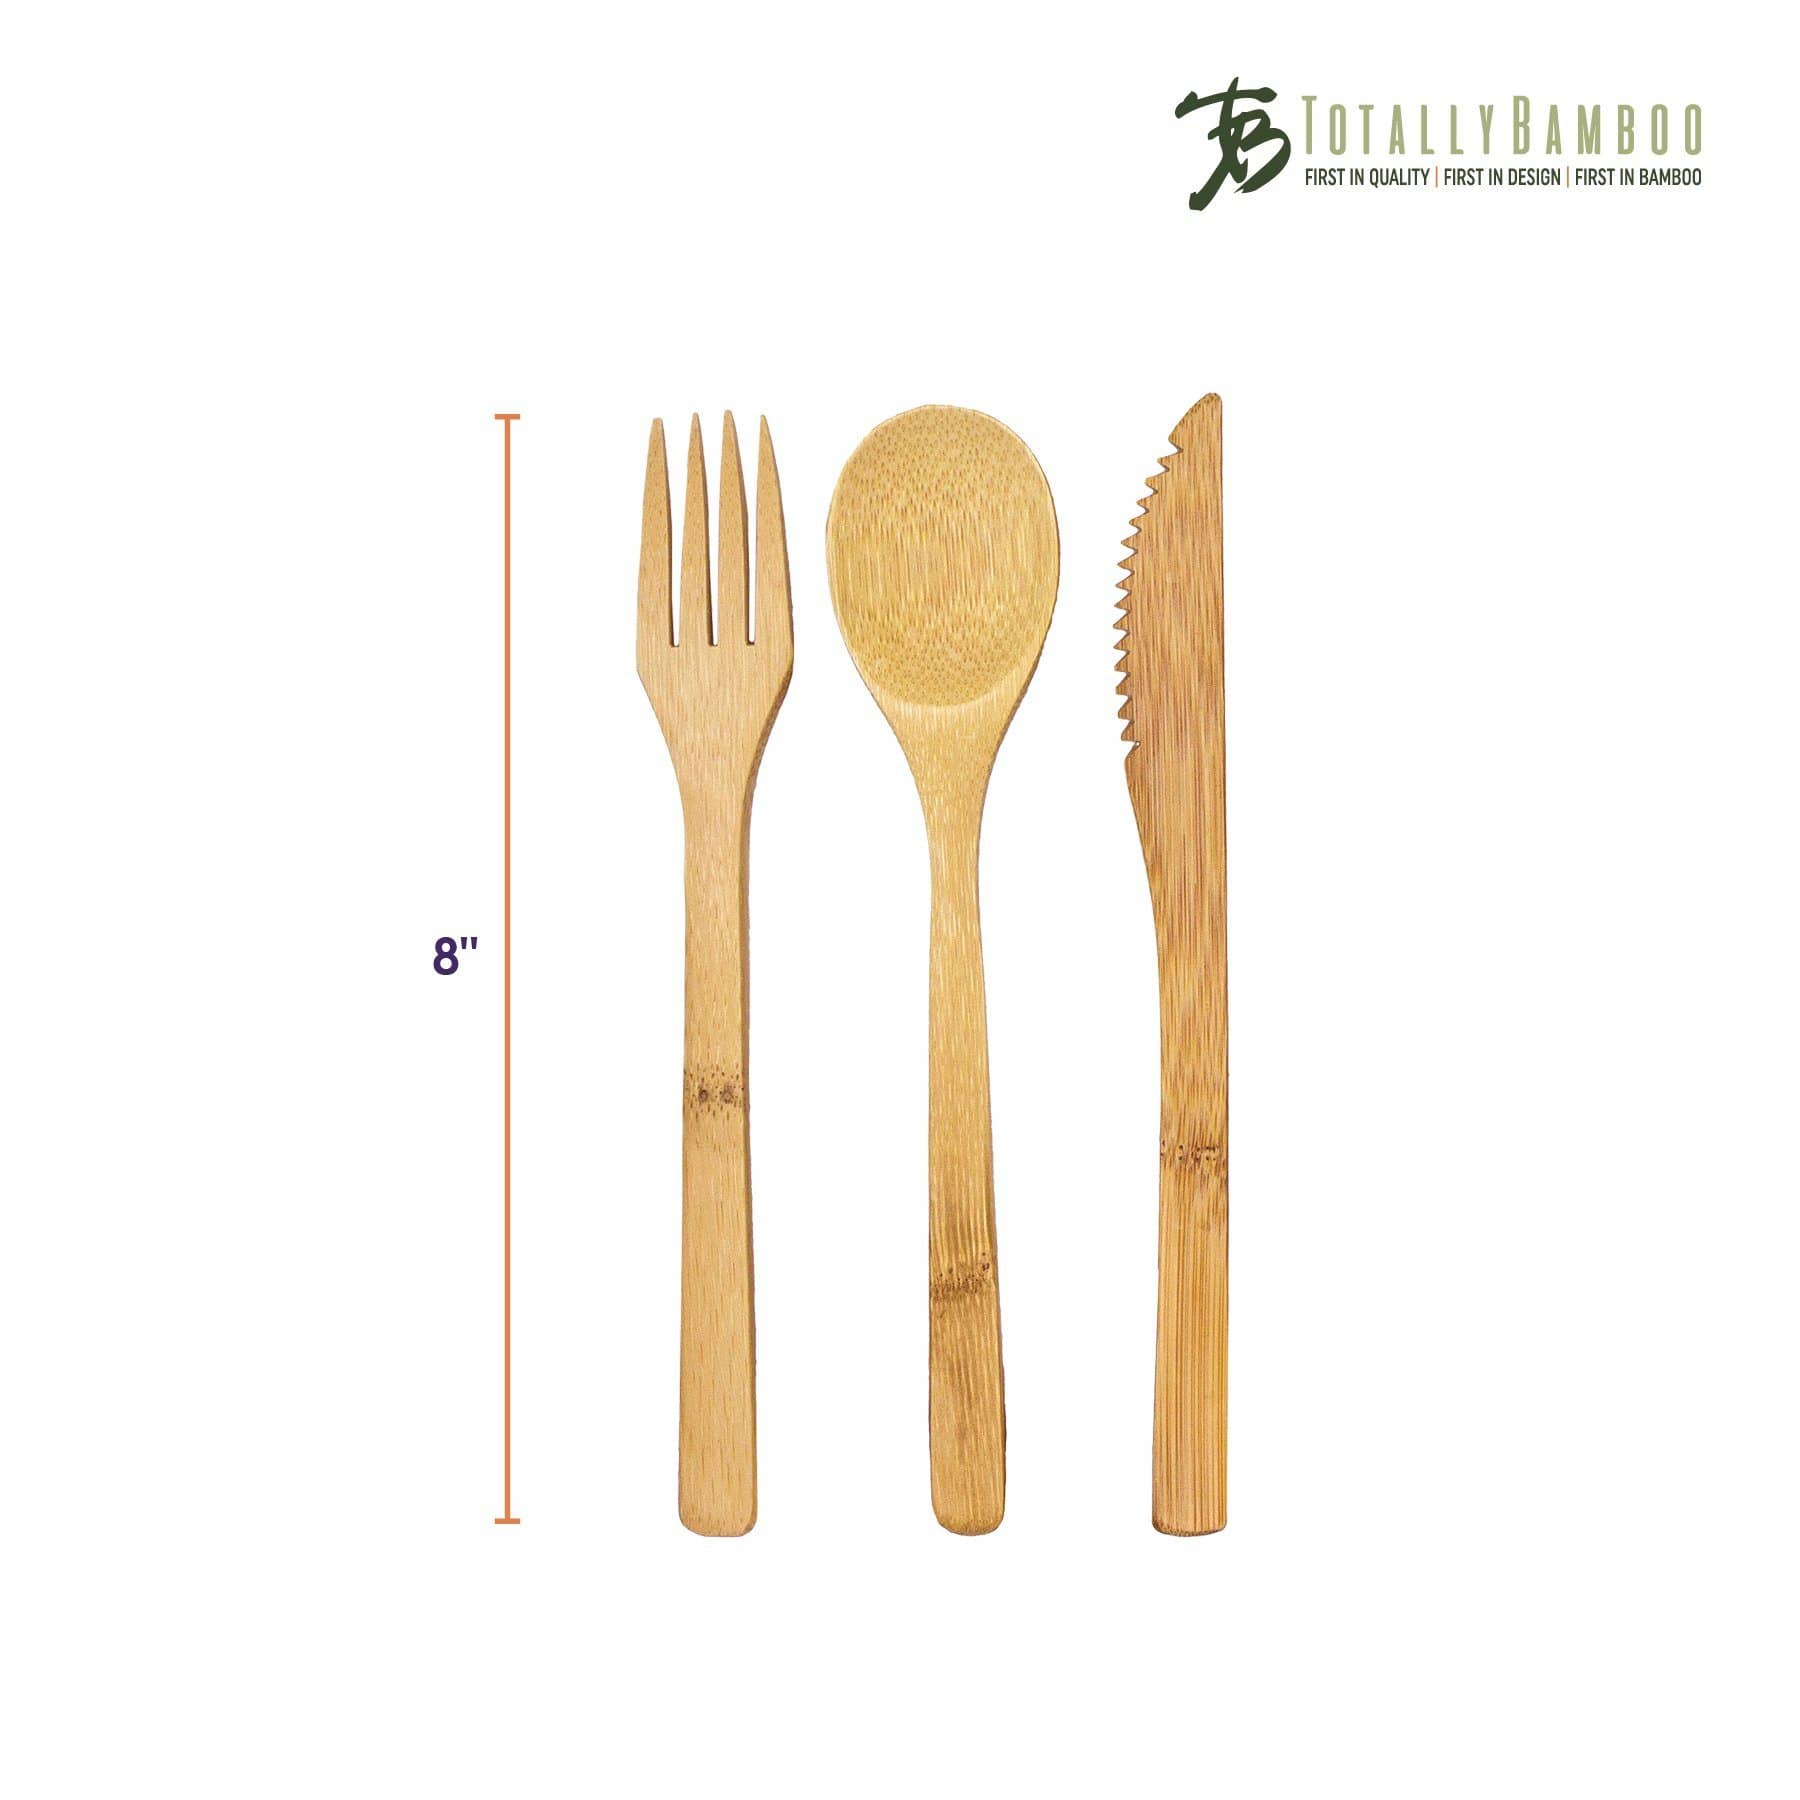 https://totallybamboo.com/cdn/shop/products/3-piece-reusable-flatware-set-fork-spoon-and-knife-totally-bamboo-140814.jpg?v=1628093044